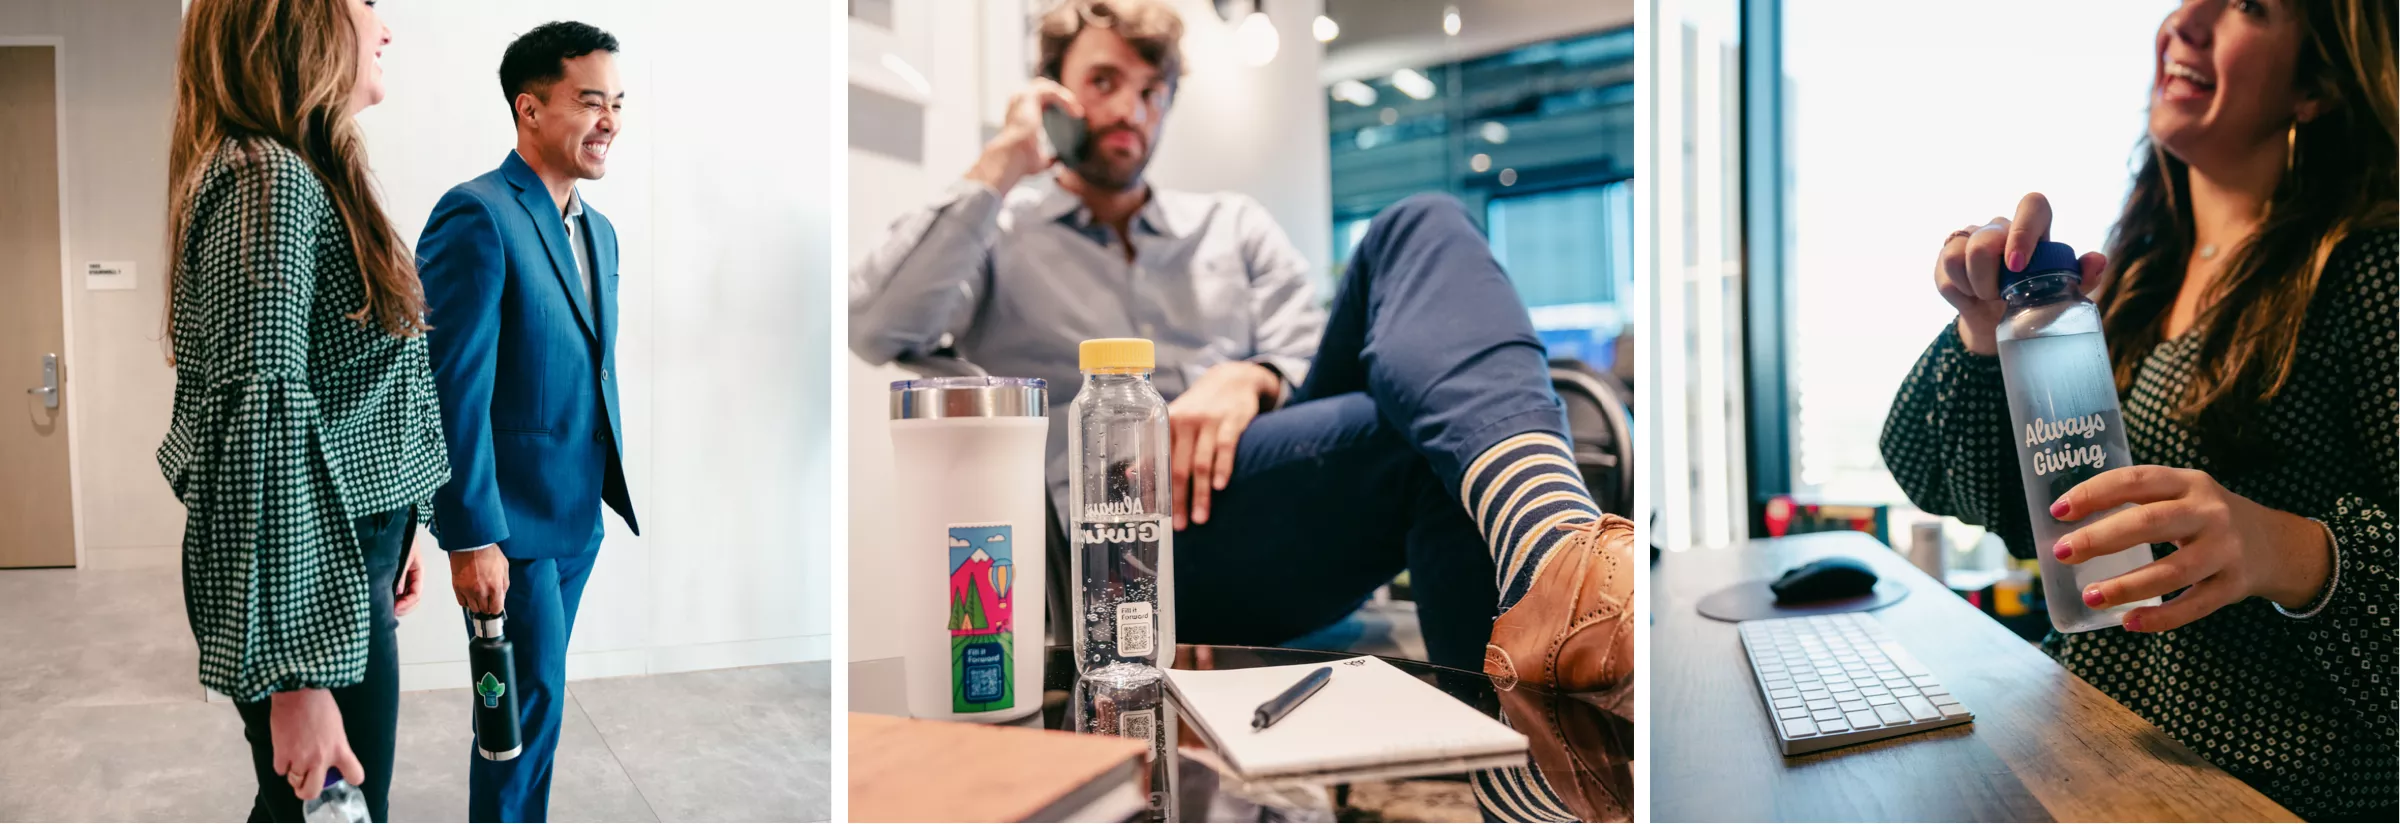 A man and a woman standing in a hallway holding a Fill it Forward reusable water bottle. A man on the phone with a Fill it Forward reusable bottle on the table in front of him. A woman opening her reusable Fill it Forward bottle at a desk.